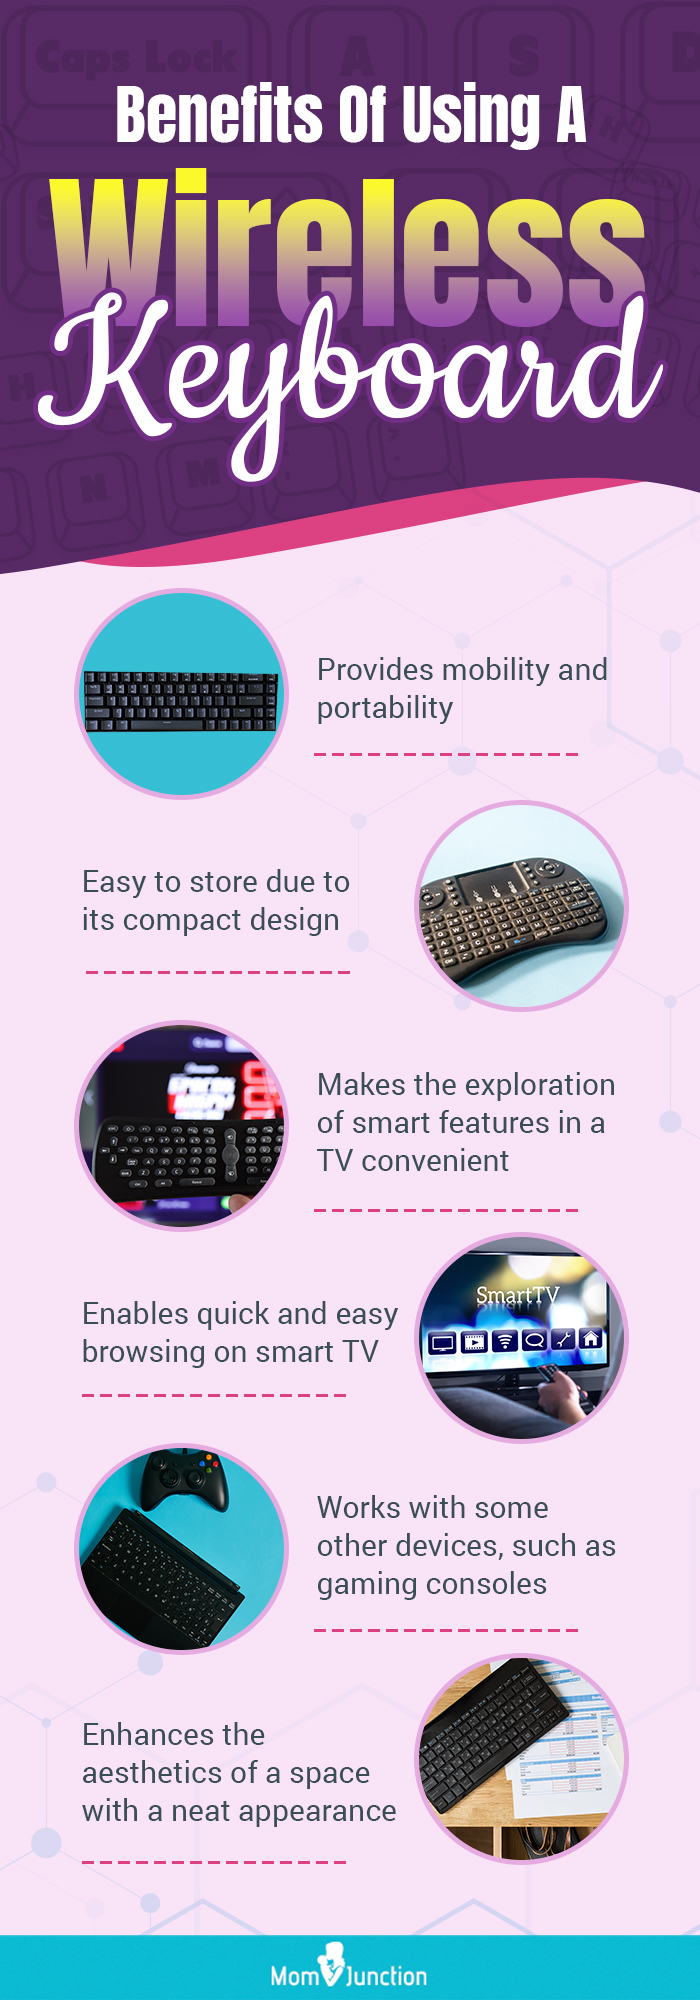 Benefits-Of-Using-A-Wireless-Keyboard (infographic)